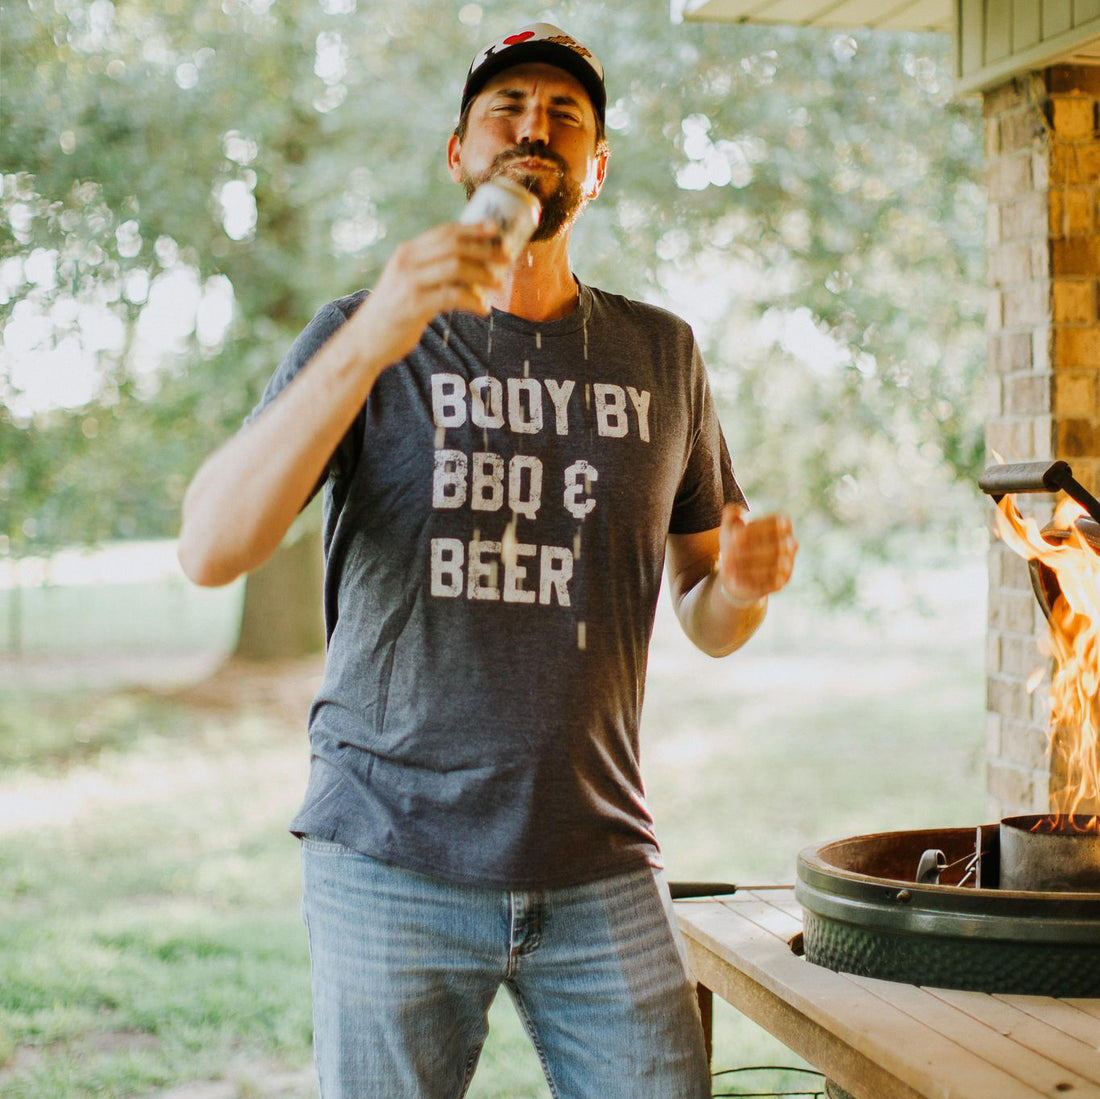 Body By BBQ and Beer Shirt (Navy), Father&